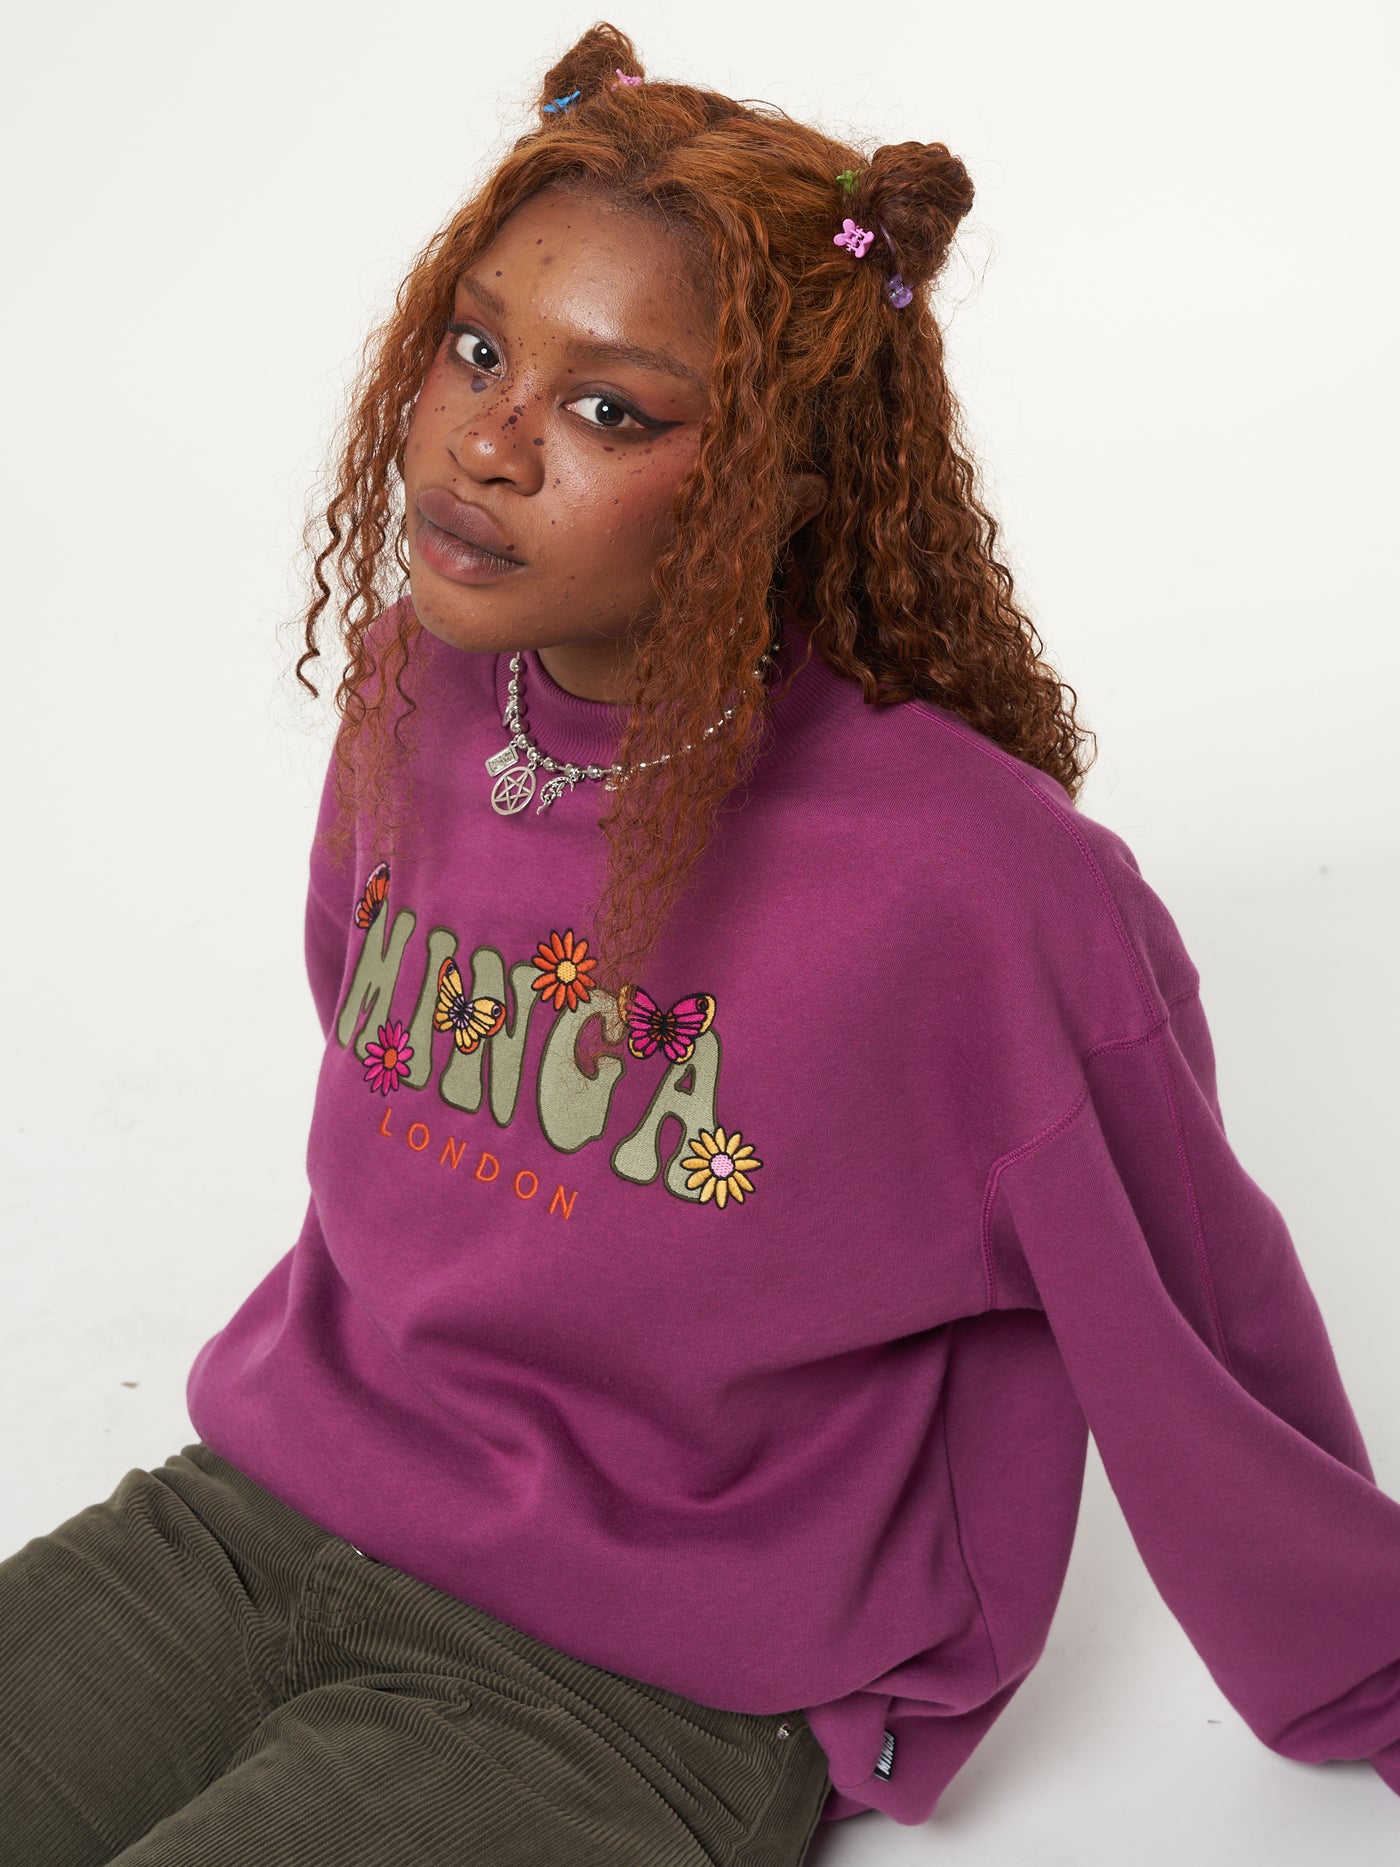 Oversized fit sweater in purple orchid with Minga London flowers and butterflies front embroidery